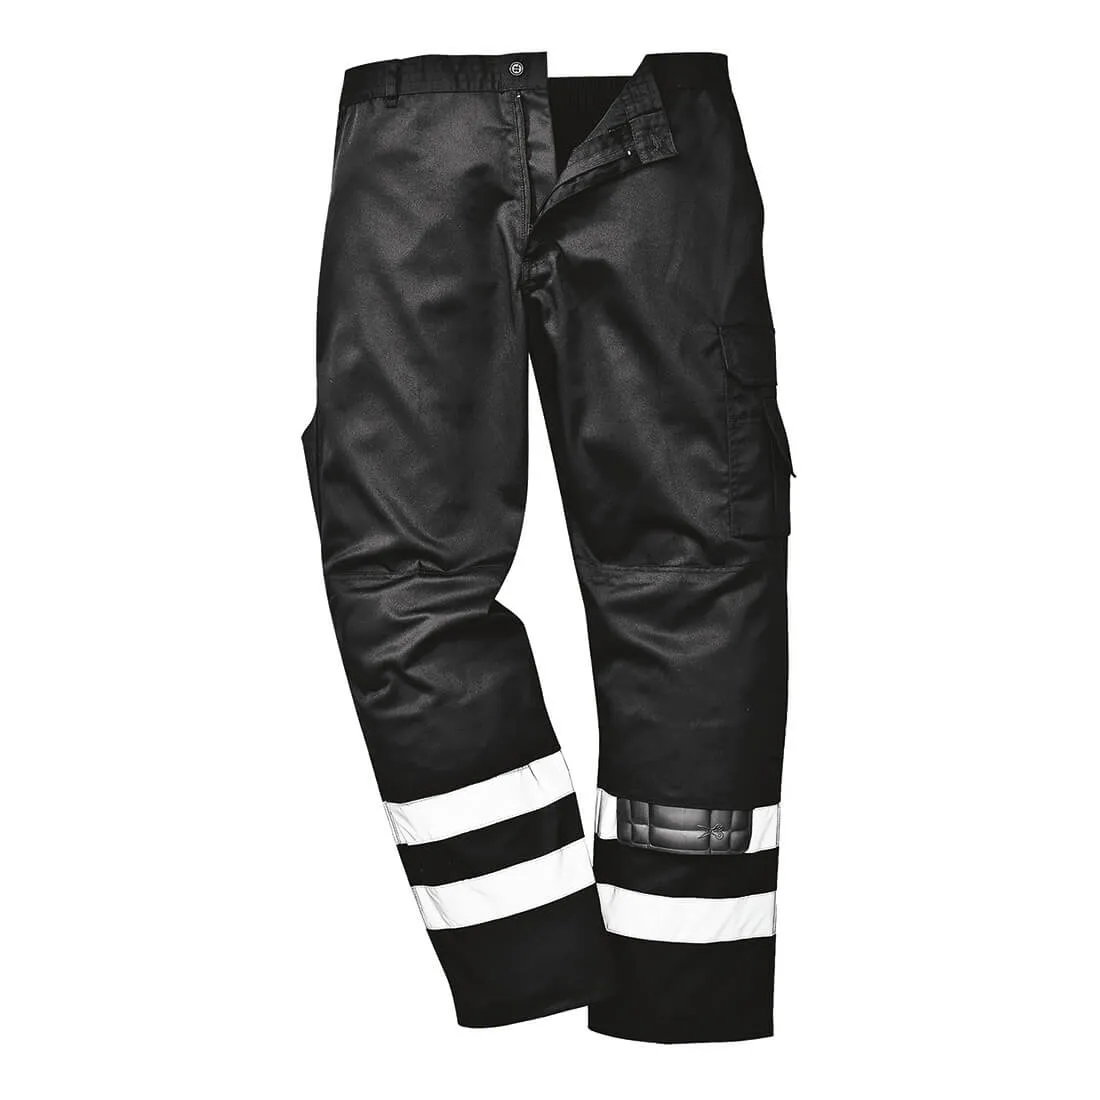 Portwest Iona S917 Safety Trousers - Black, Small, 31"